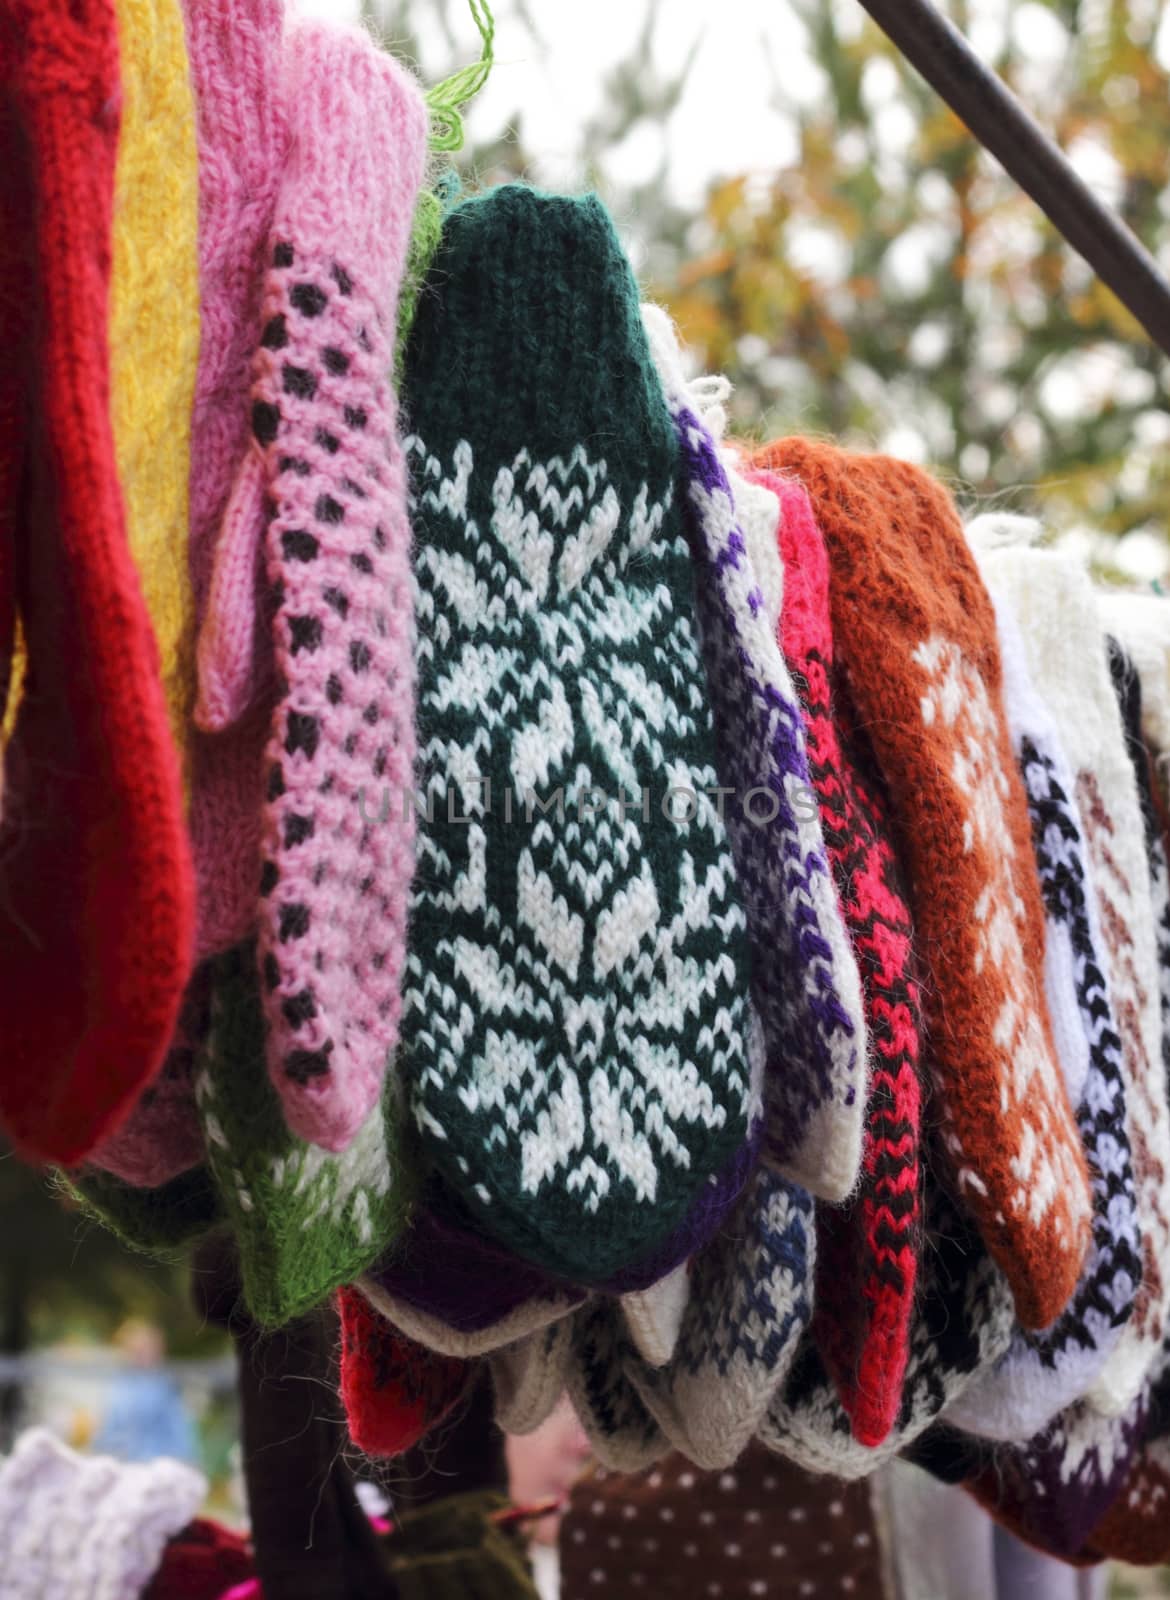 It is the various patterns knitted mitten